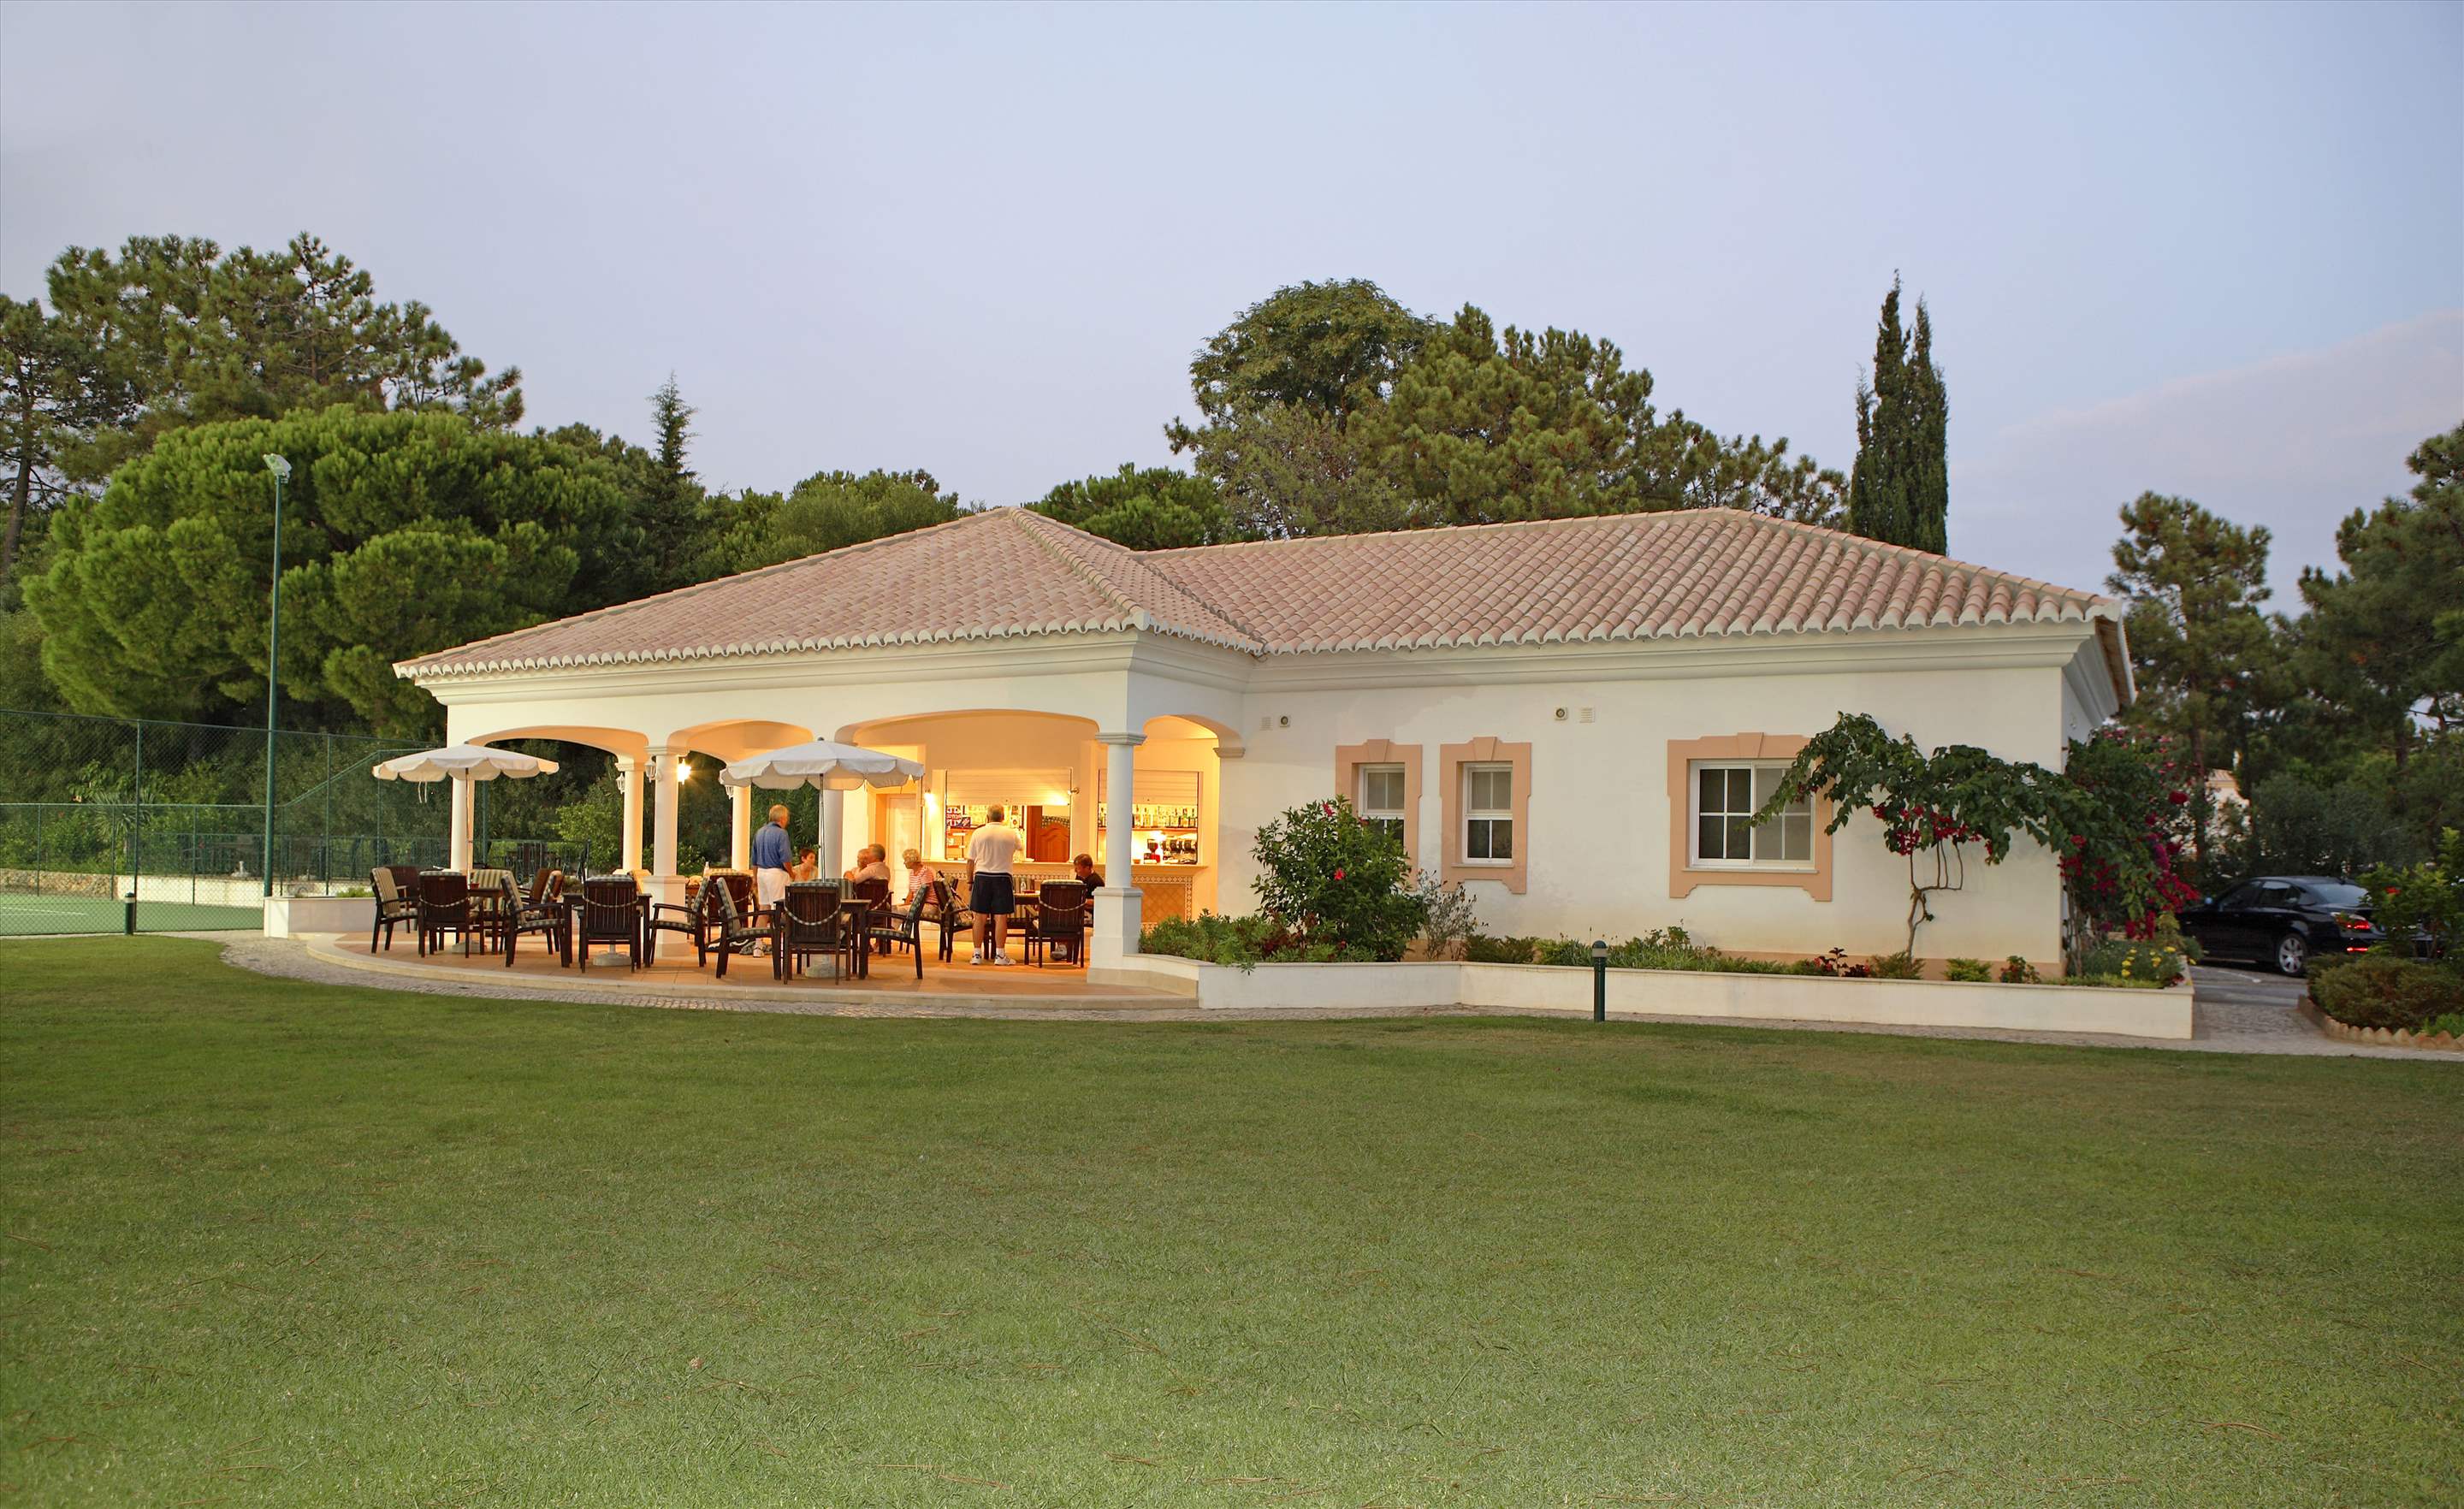 Four Seasons Country Club 1 bed, Sunday Arrival, 1 bedroom apartment in Four Seasons Country Club, Algarve Photo #34